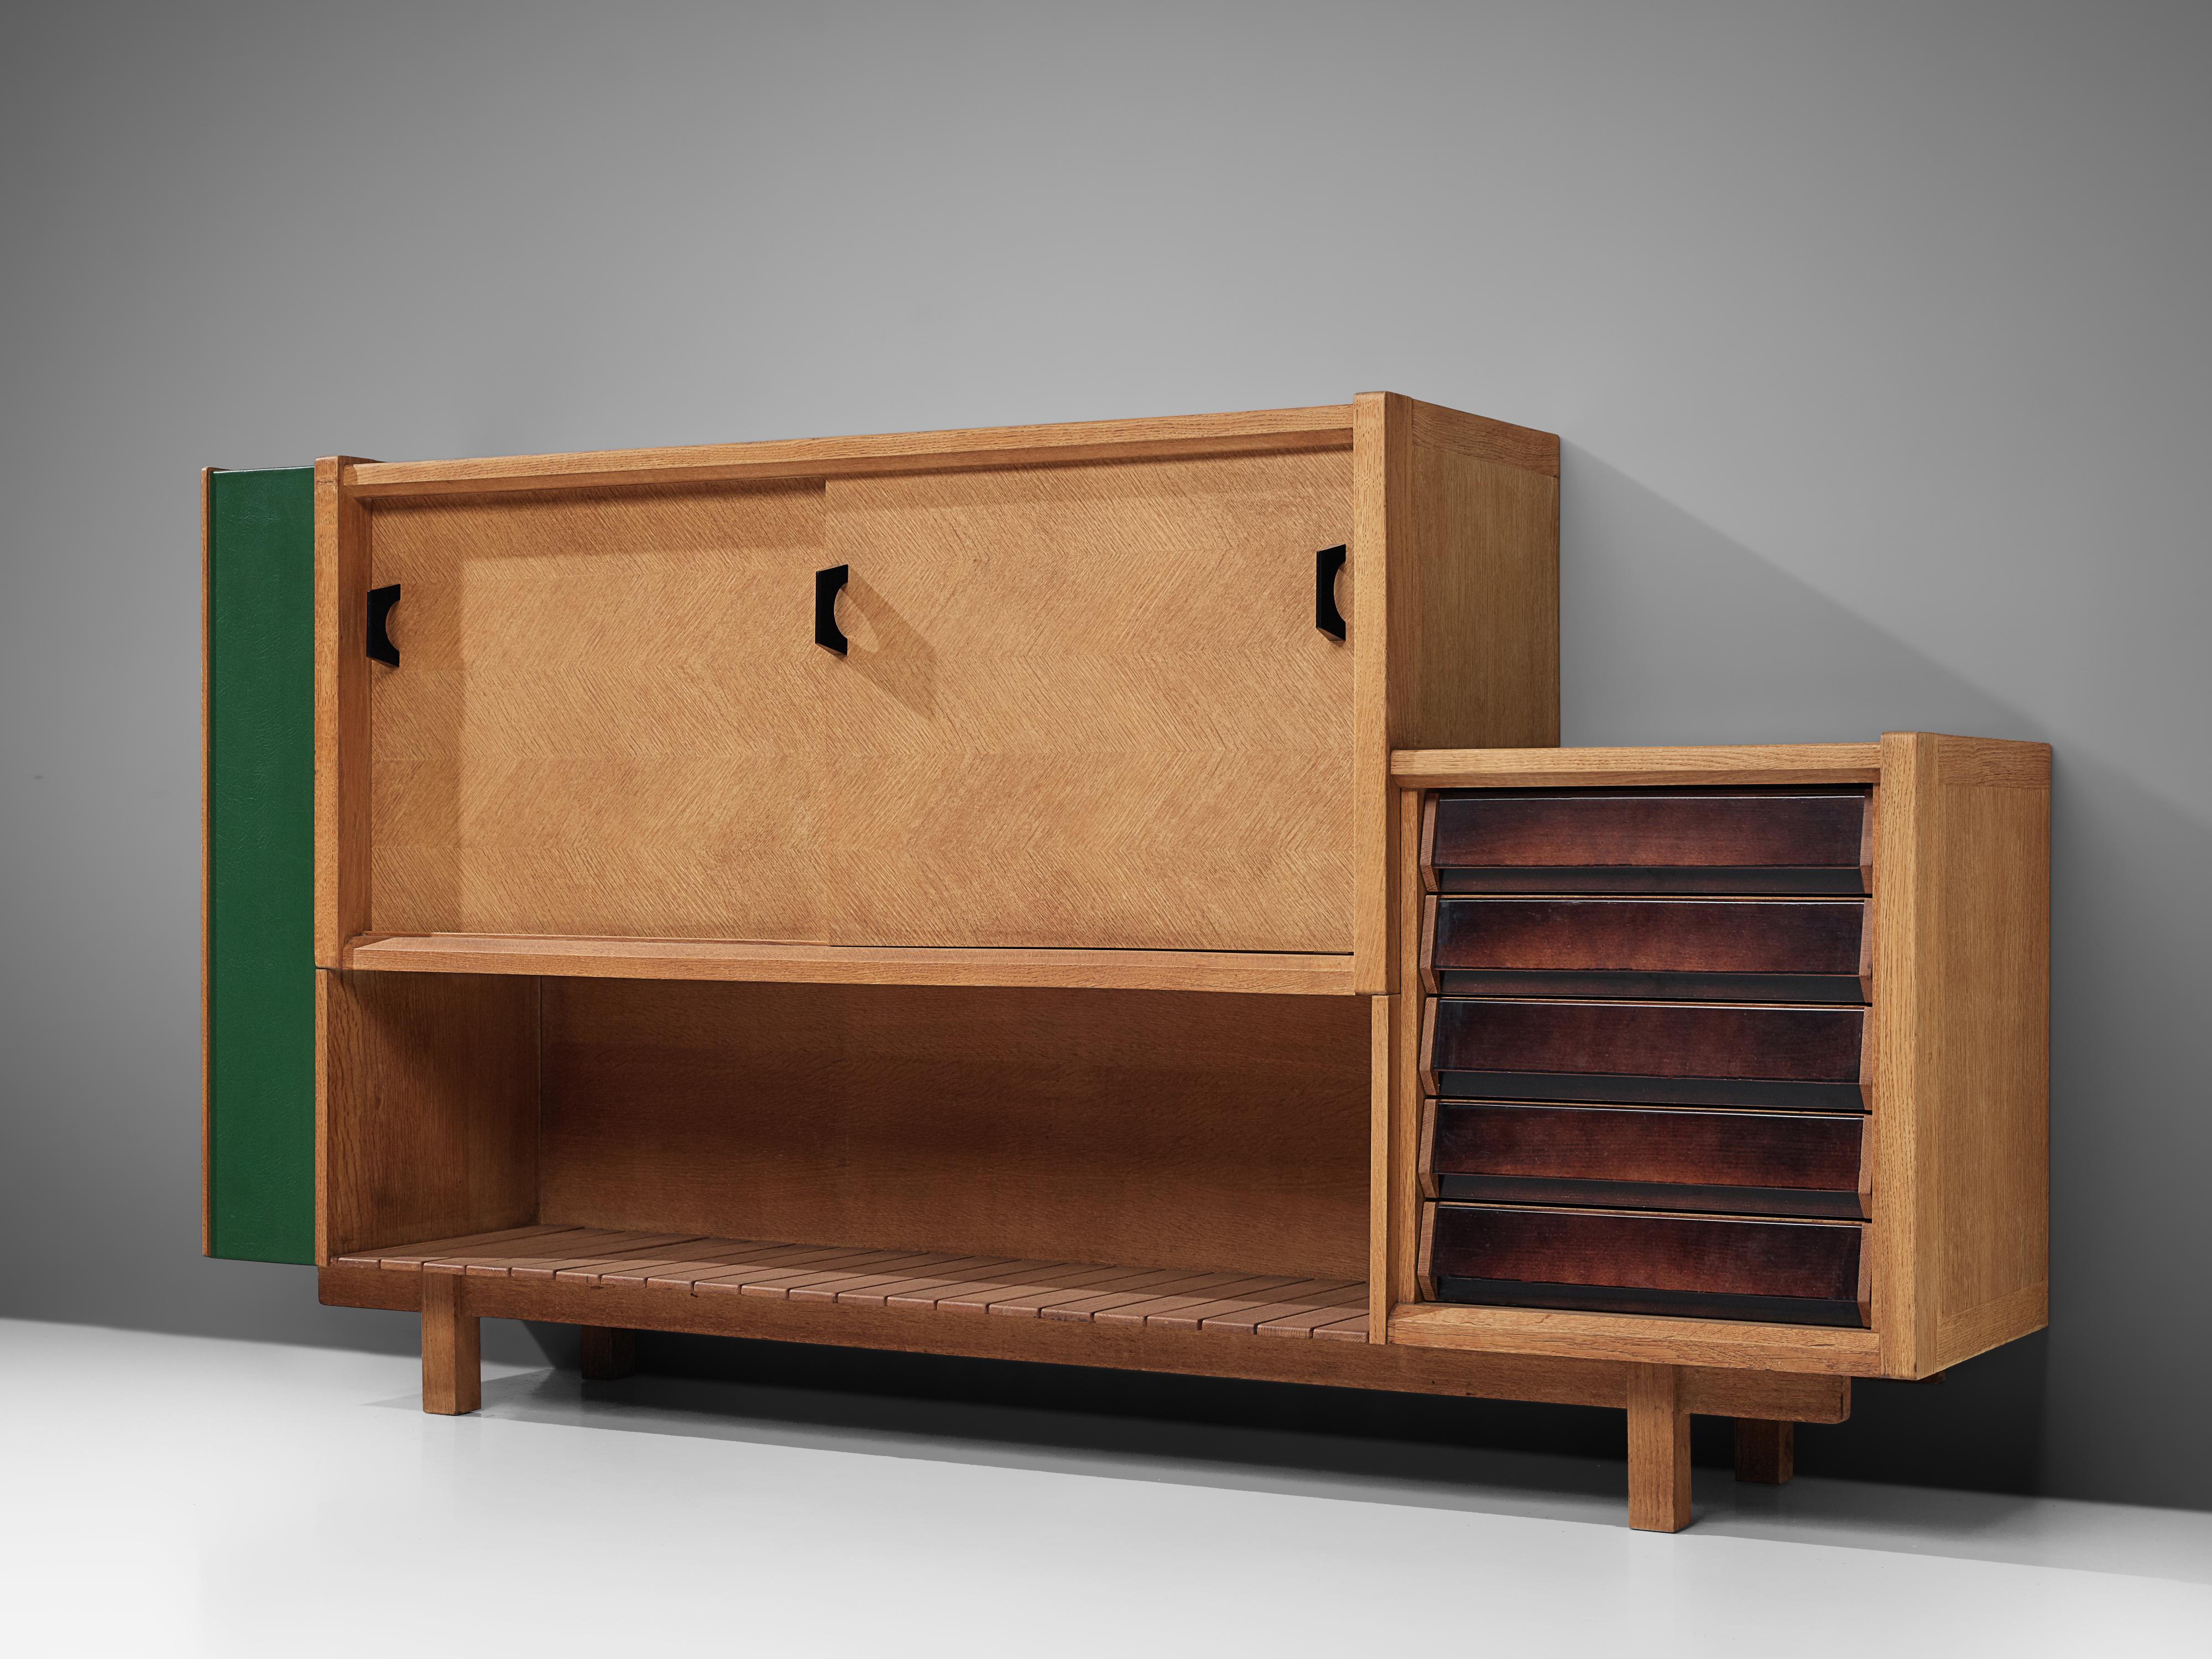 Jacques Chambron and Robert Guillerme, cabinet, oak, France, 1950s.

This sculptural sideboard by Guillerme and Chambron is very well executed and made out of blond oak wood. The oak has been inlayed into different angles, which creates a geometric